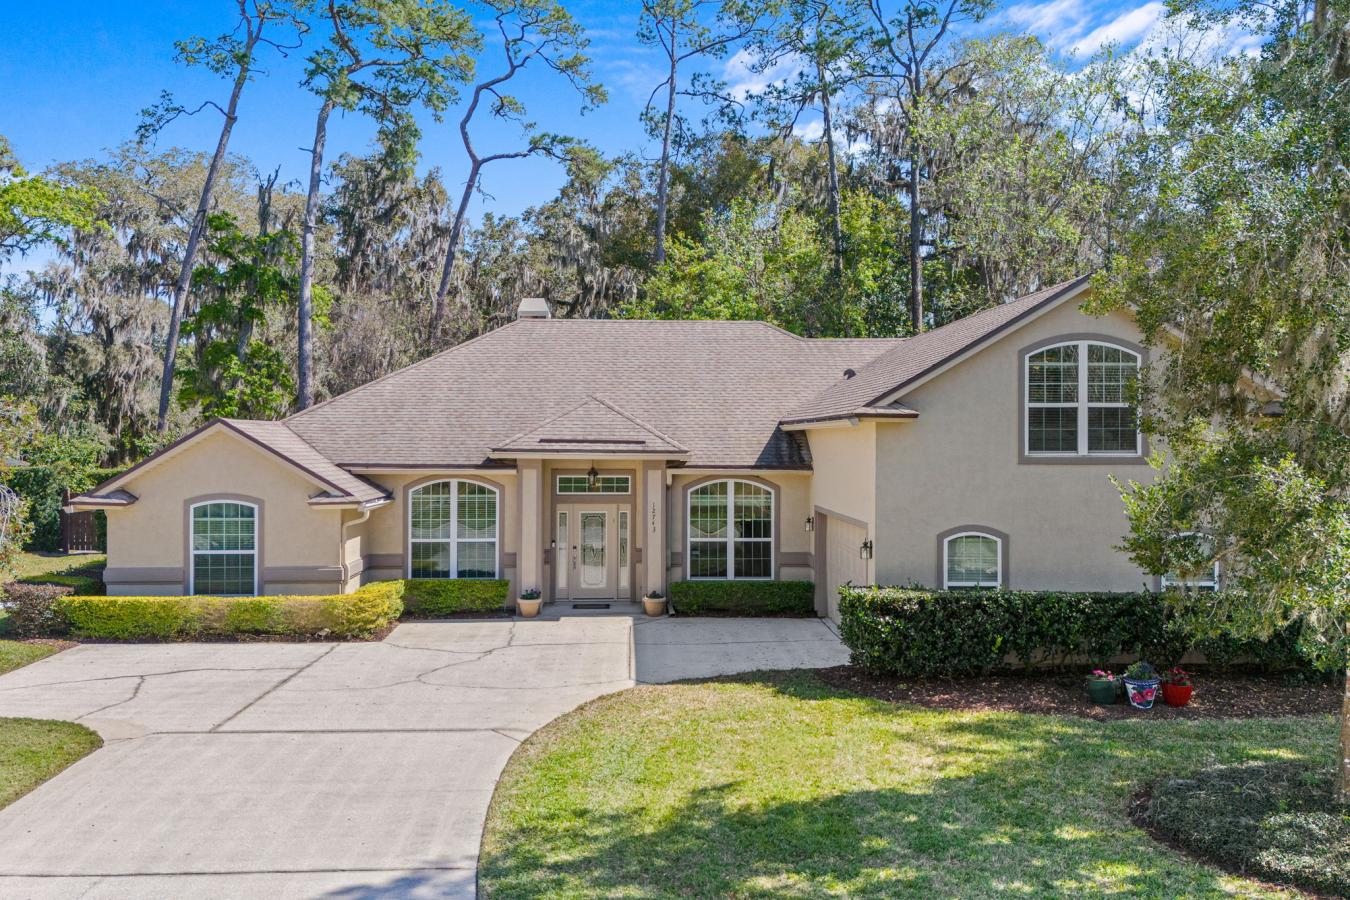 12743 Camellia Bay Dr E., Jacksonville, Florida, 32223, United States, 4 Bedrooms Bedrooms, ,3 BathroomsBathrooms,Residential,For Sale,12743 Camellia Bay Dr E.,1478271